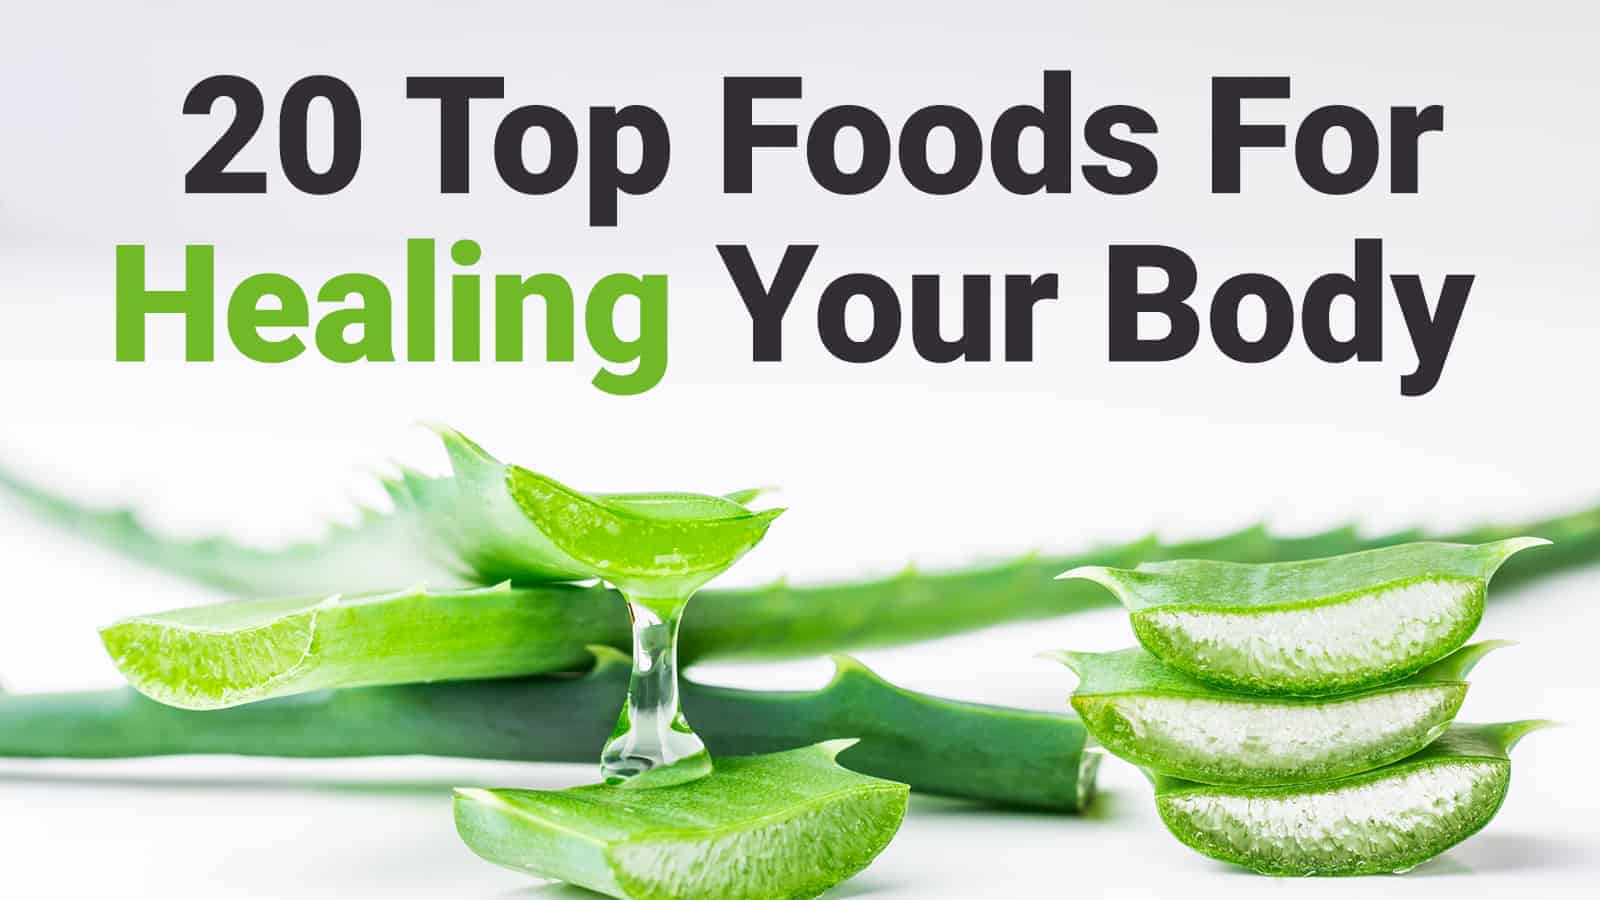 20 Top Foods For Healing Your Body